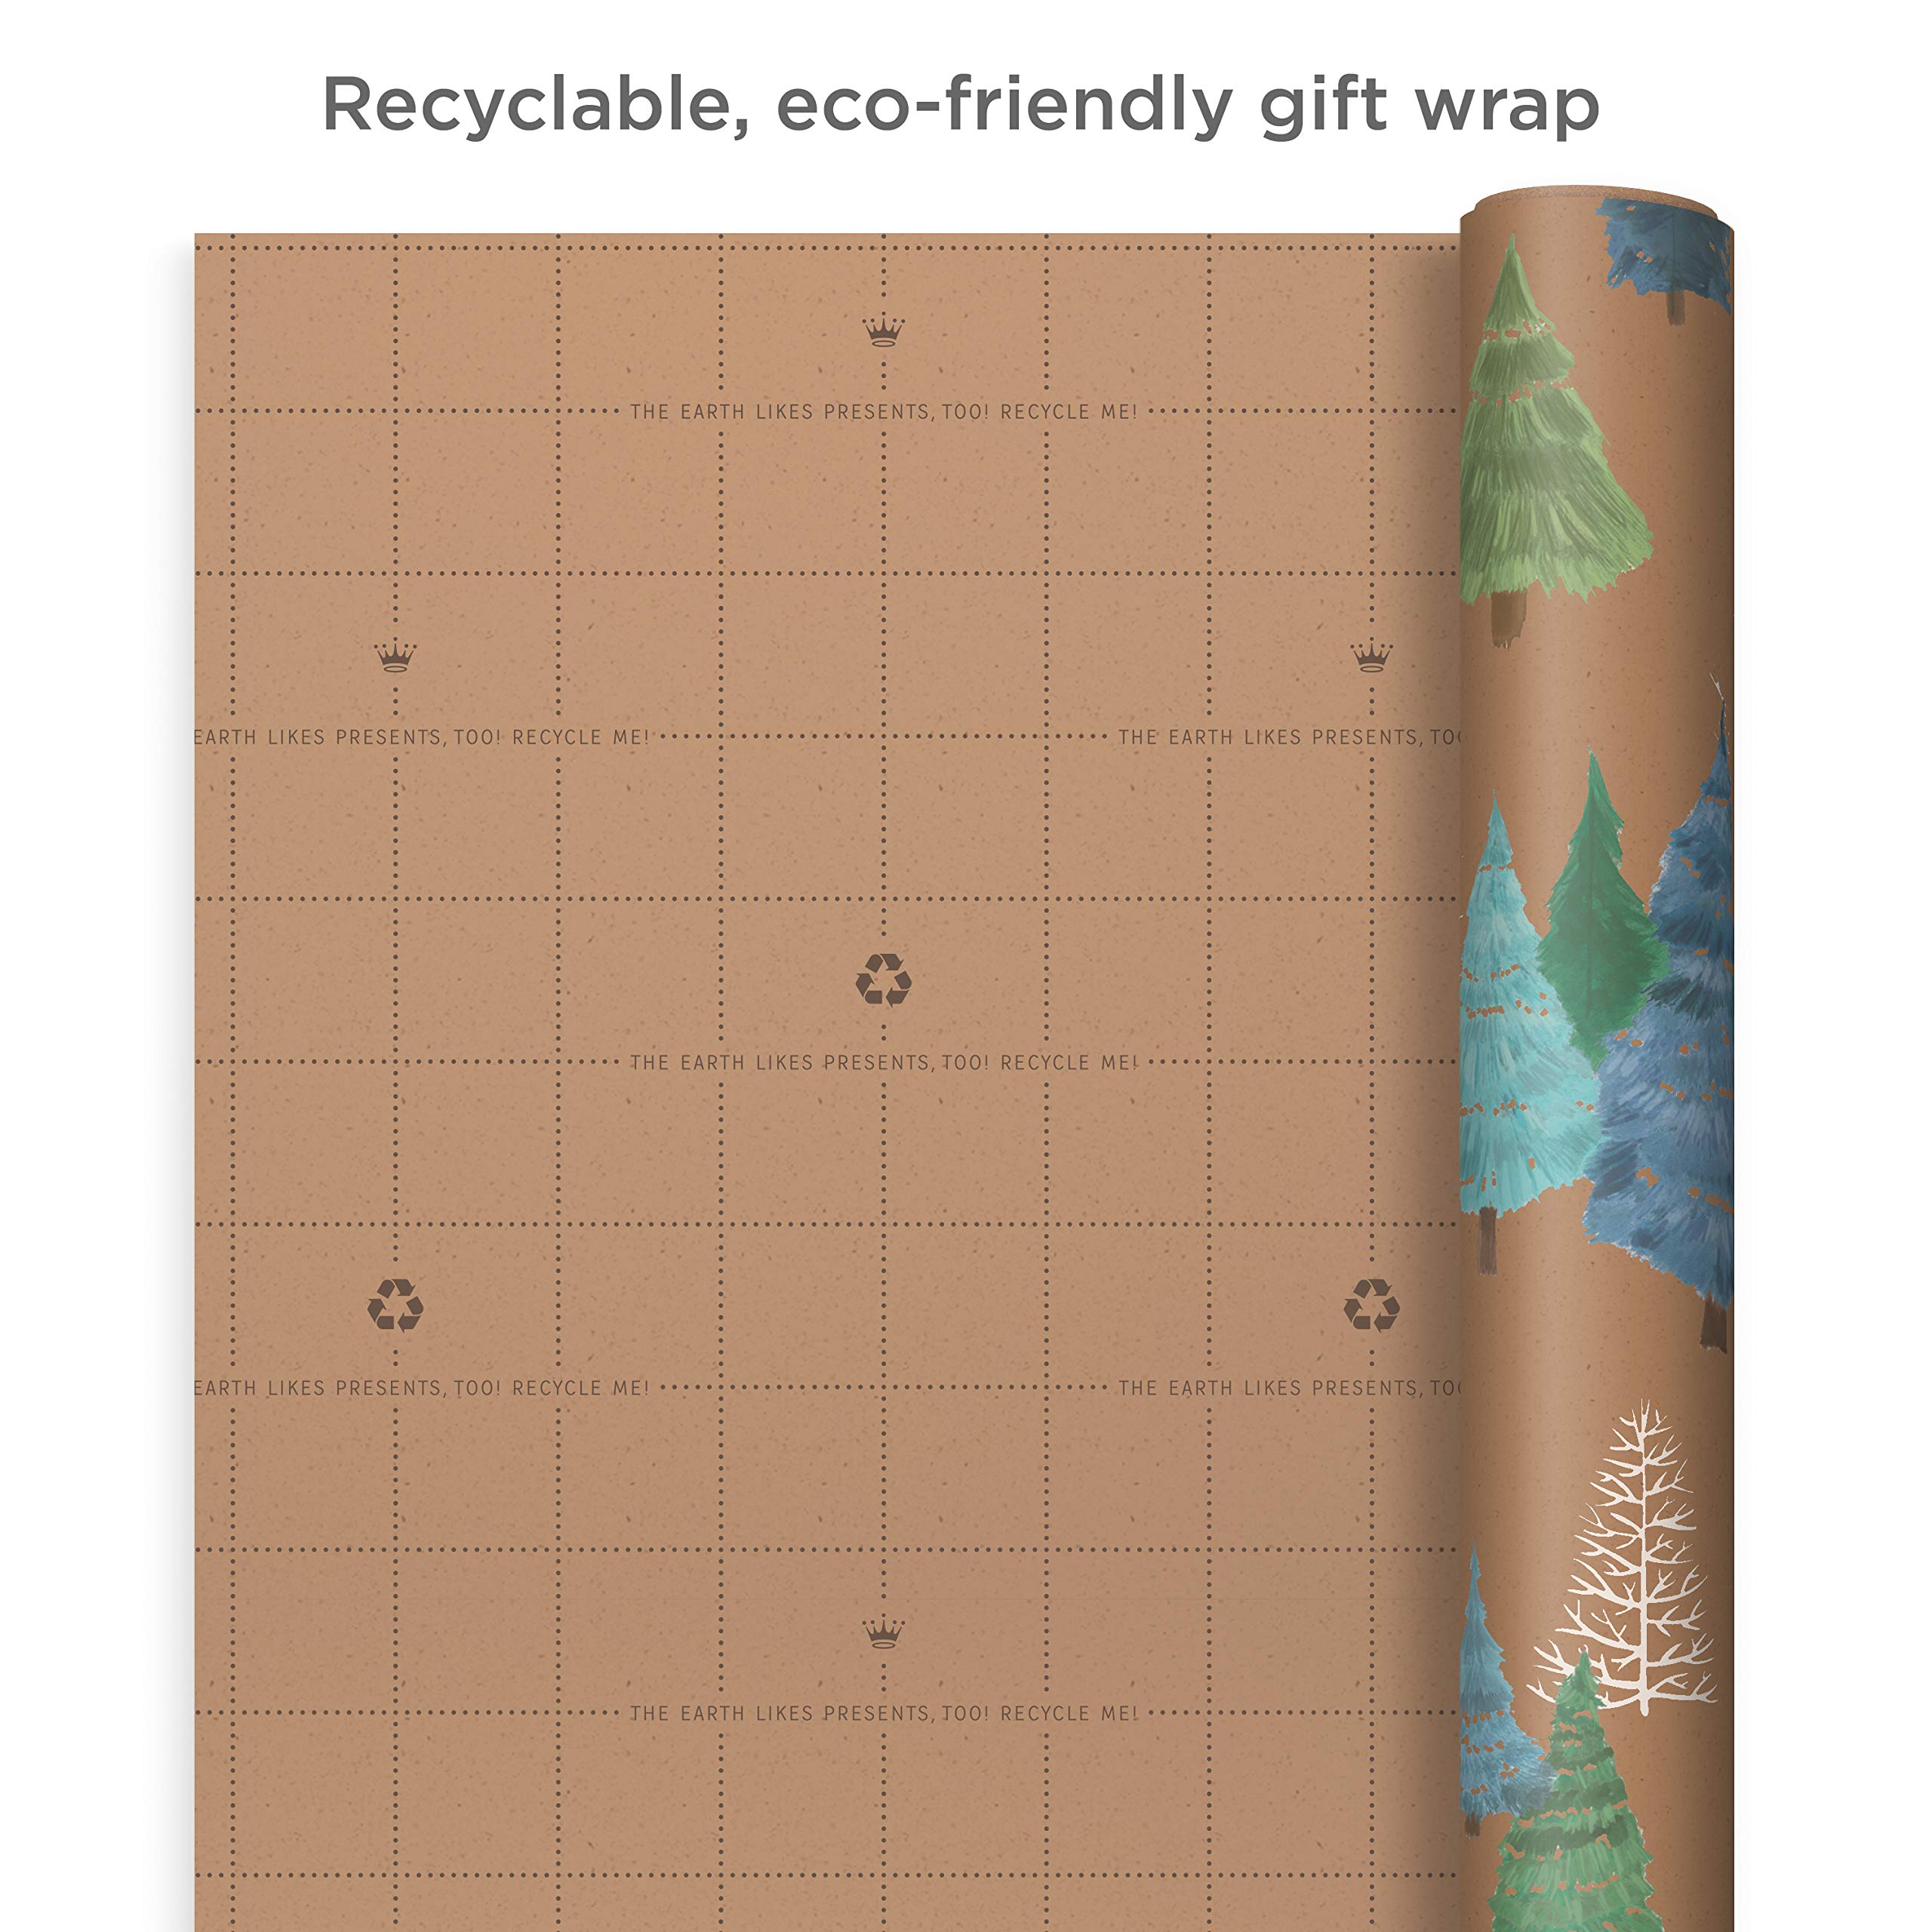 Hallmark Holiday Sustainable Kraft Tri-Pack with Cut Lines on Reverse (3 Rolls: 90 sq. ft. ttl) Wintry Nature: White Snowflakes, Blue and Green Foliage, Christmas Trees, Sustainable Holiday Wrap (0005JXW1051)